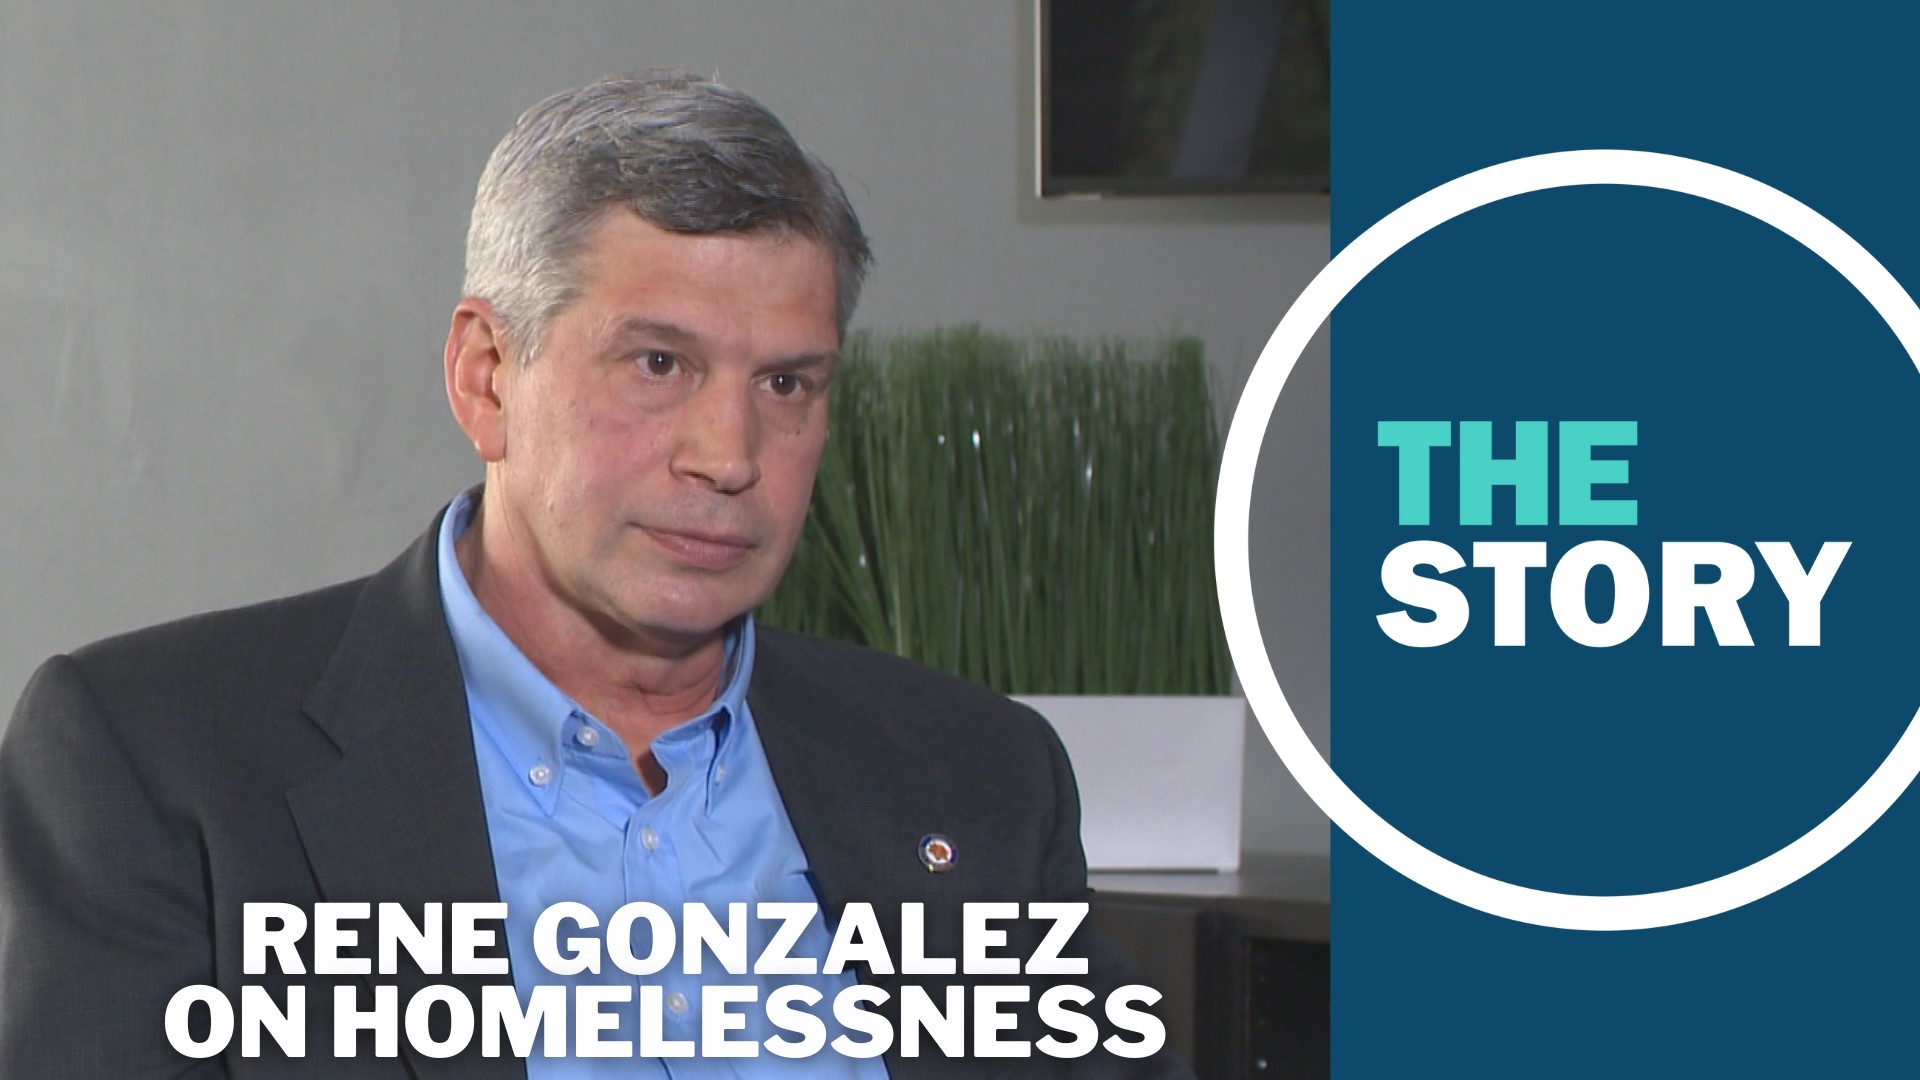 Gonzalez is highly critical of Multnomah County's use of funding for homeless services, and suggests the city should stop backing those efforts without big changes.